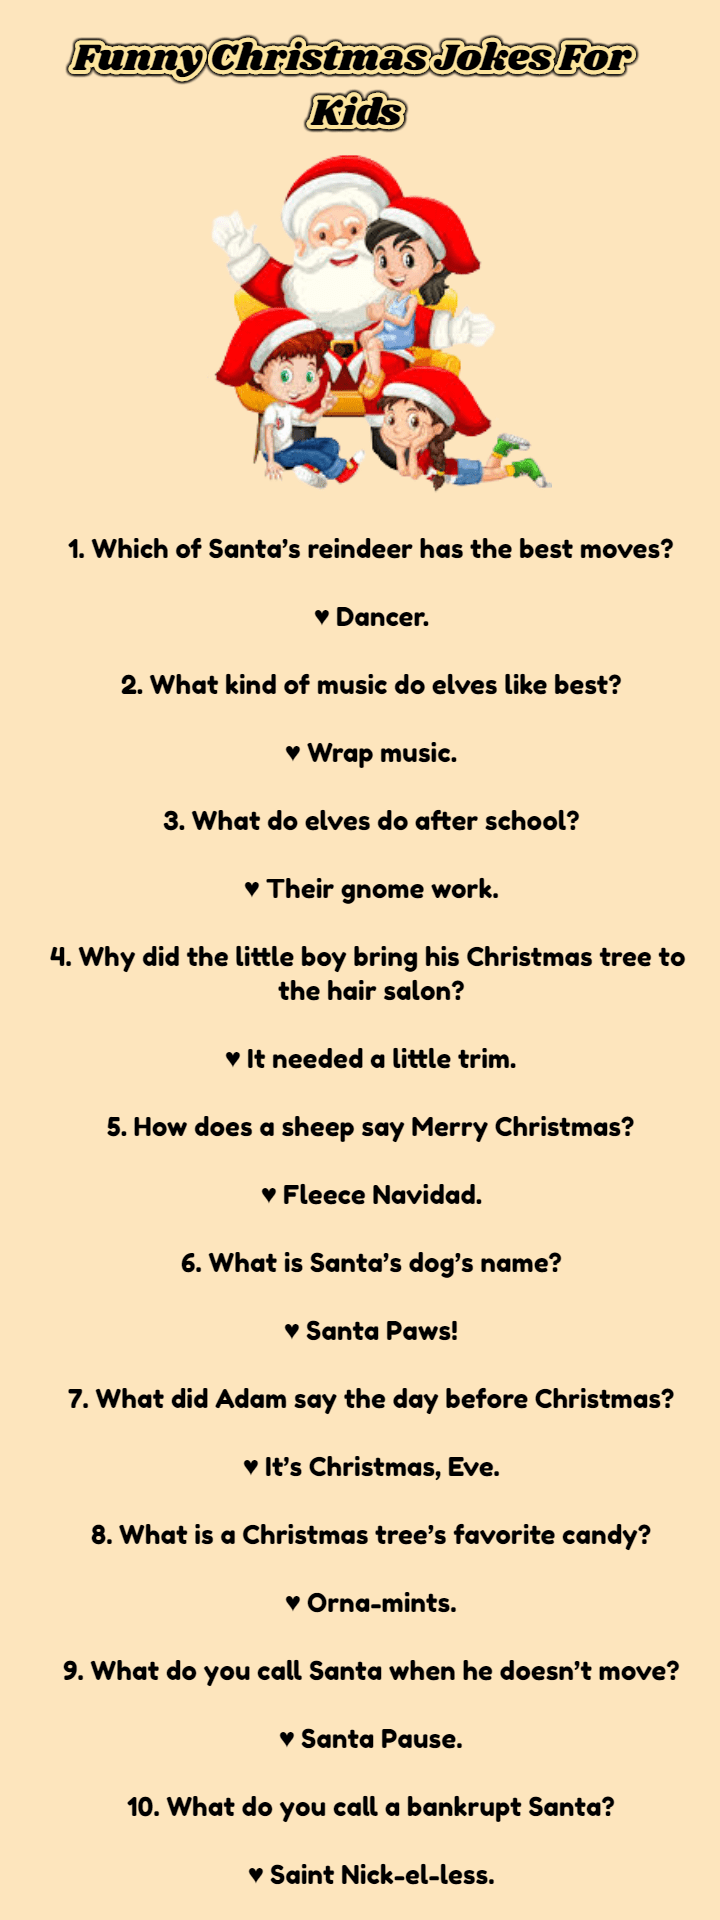 Funny Christmas Jokes For Kids and Images